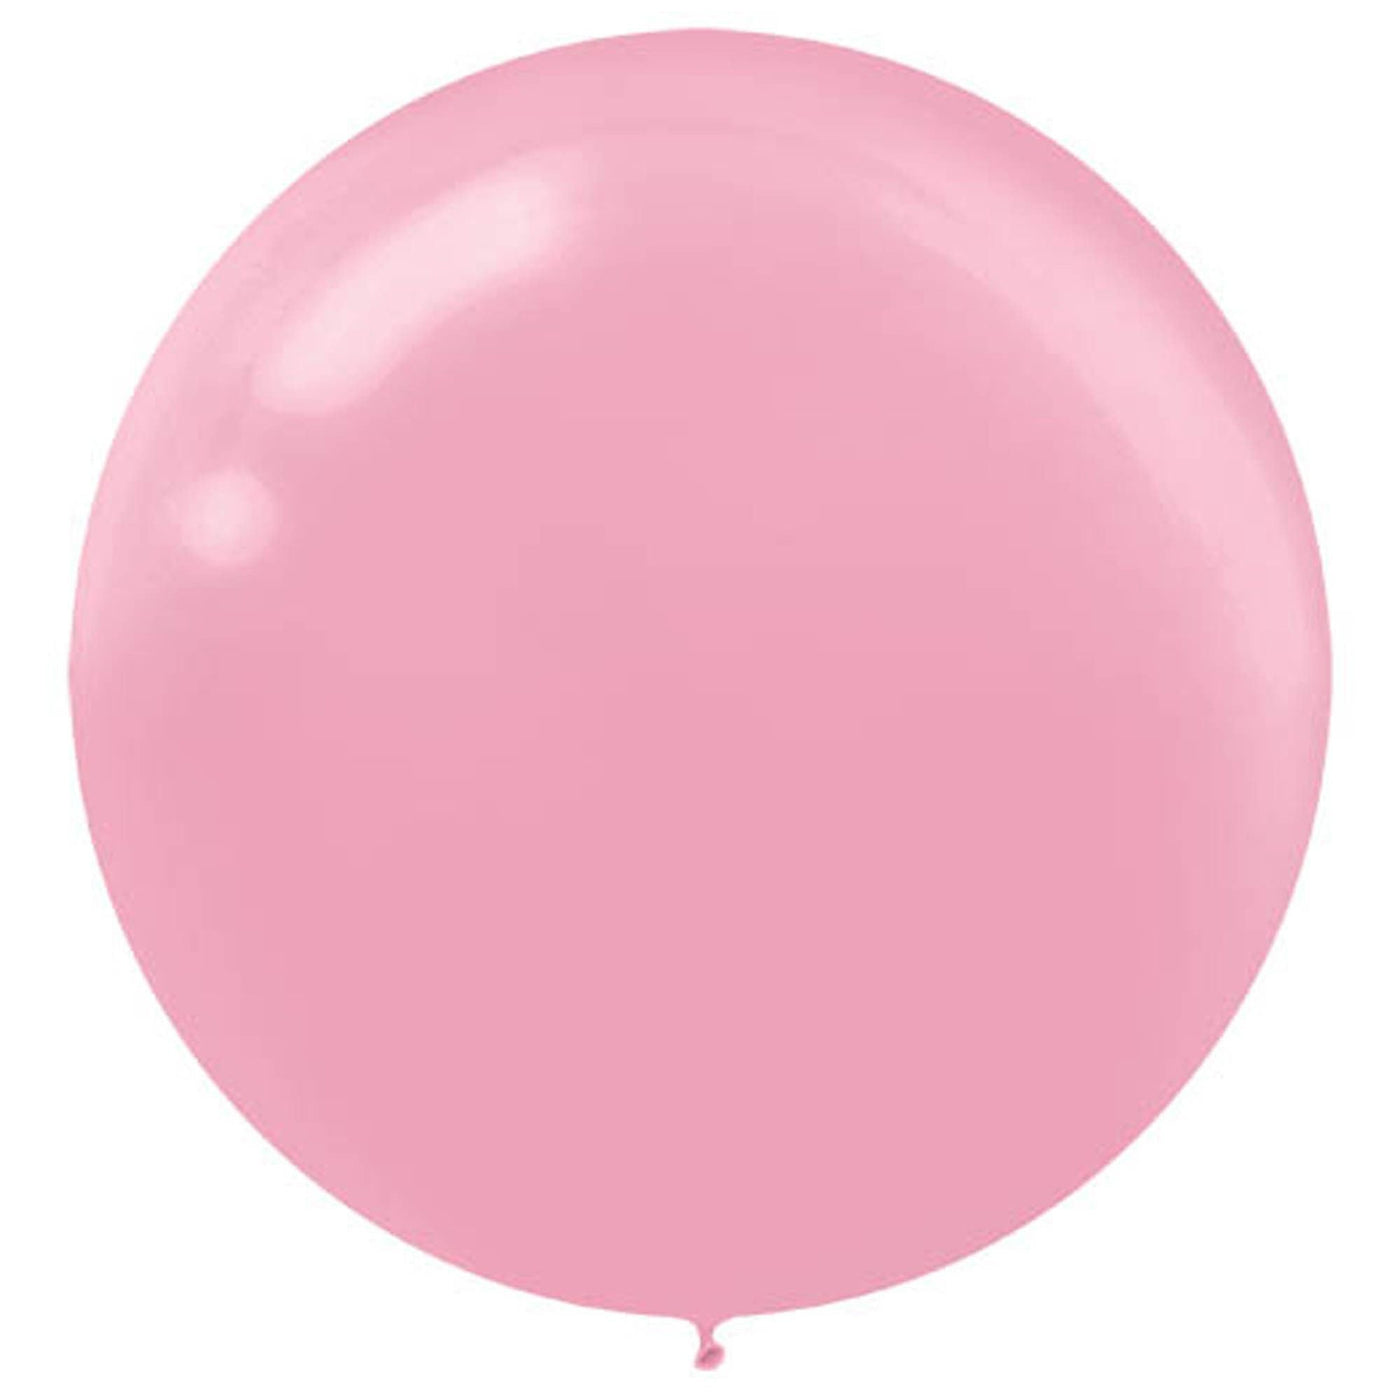 New Pink Latex 24'' Balloons 25ct - JJ's Party House